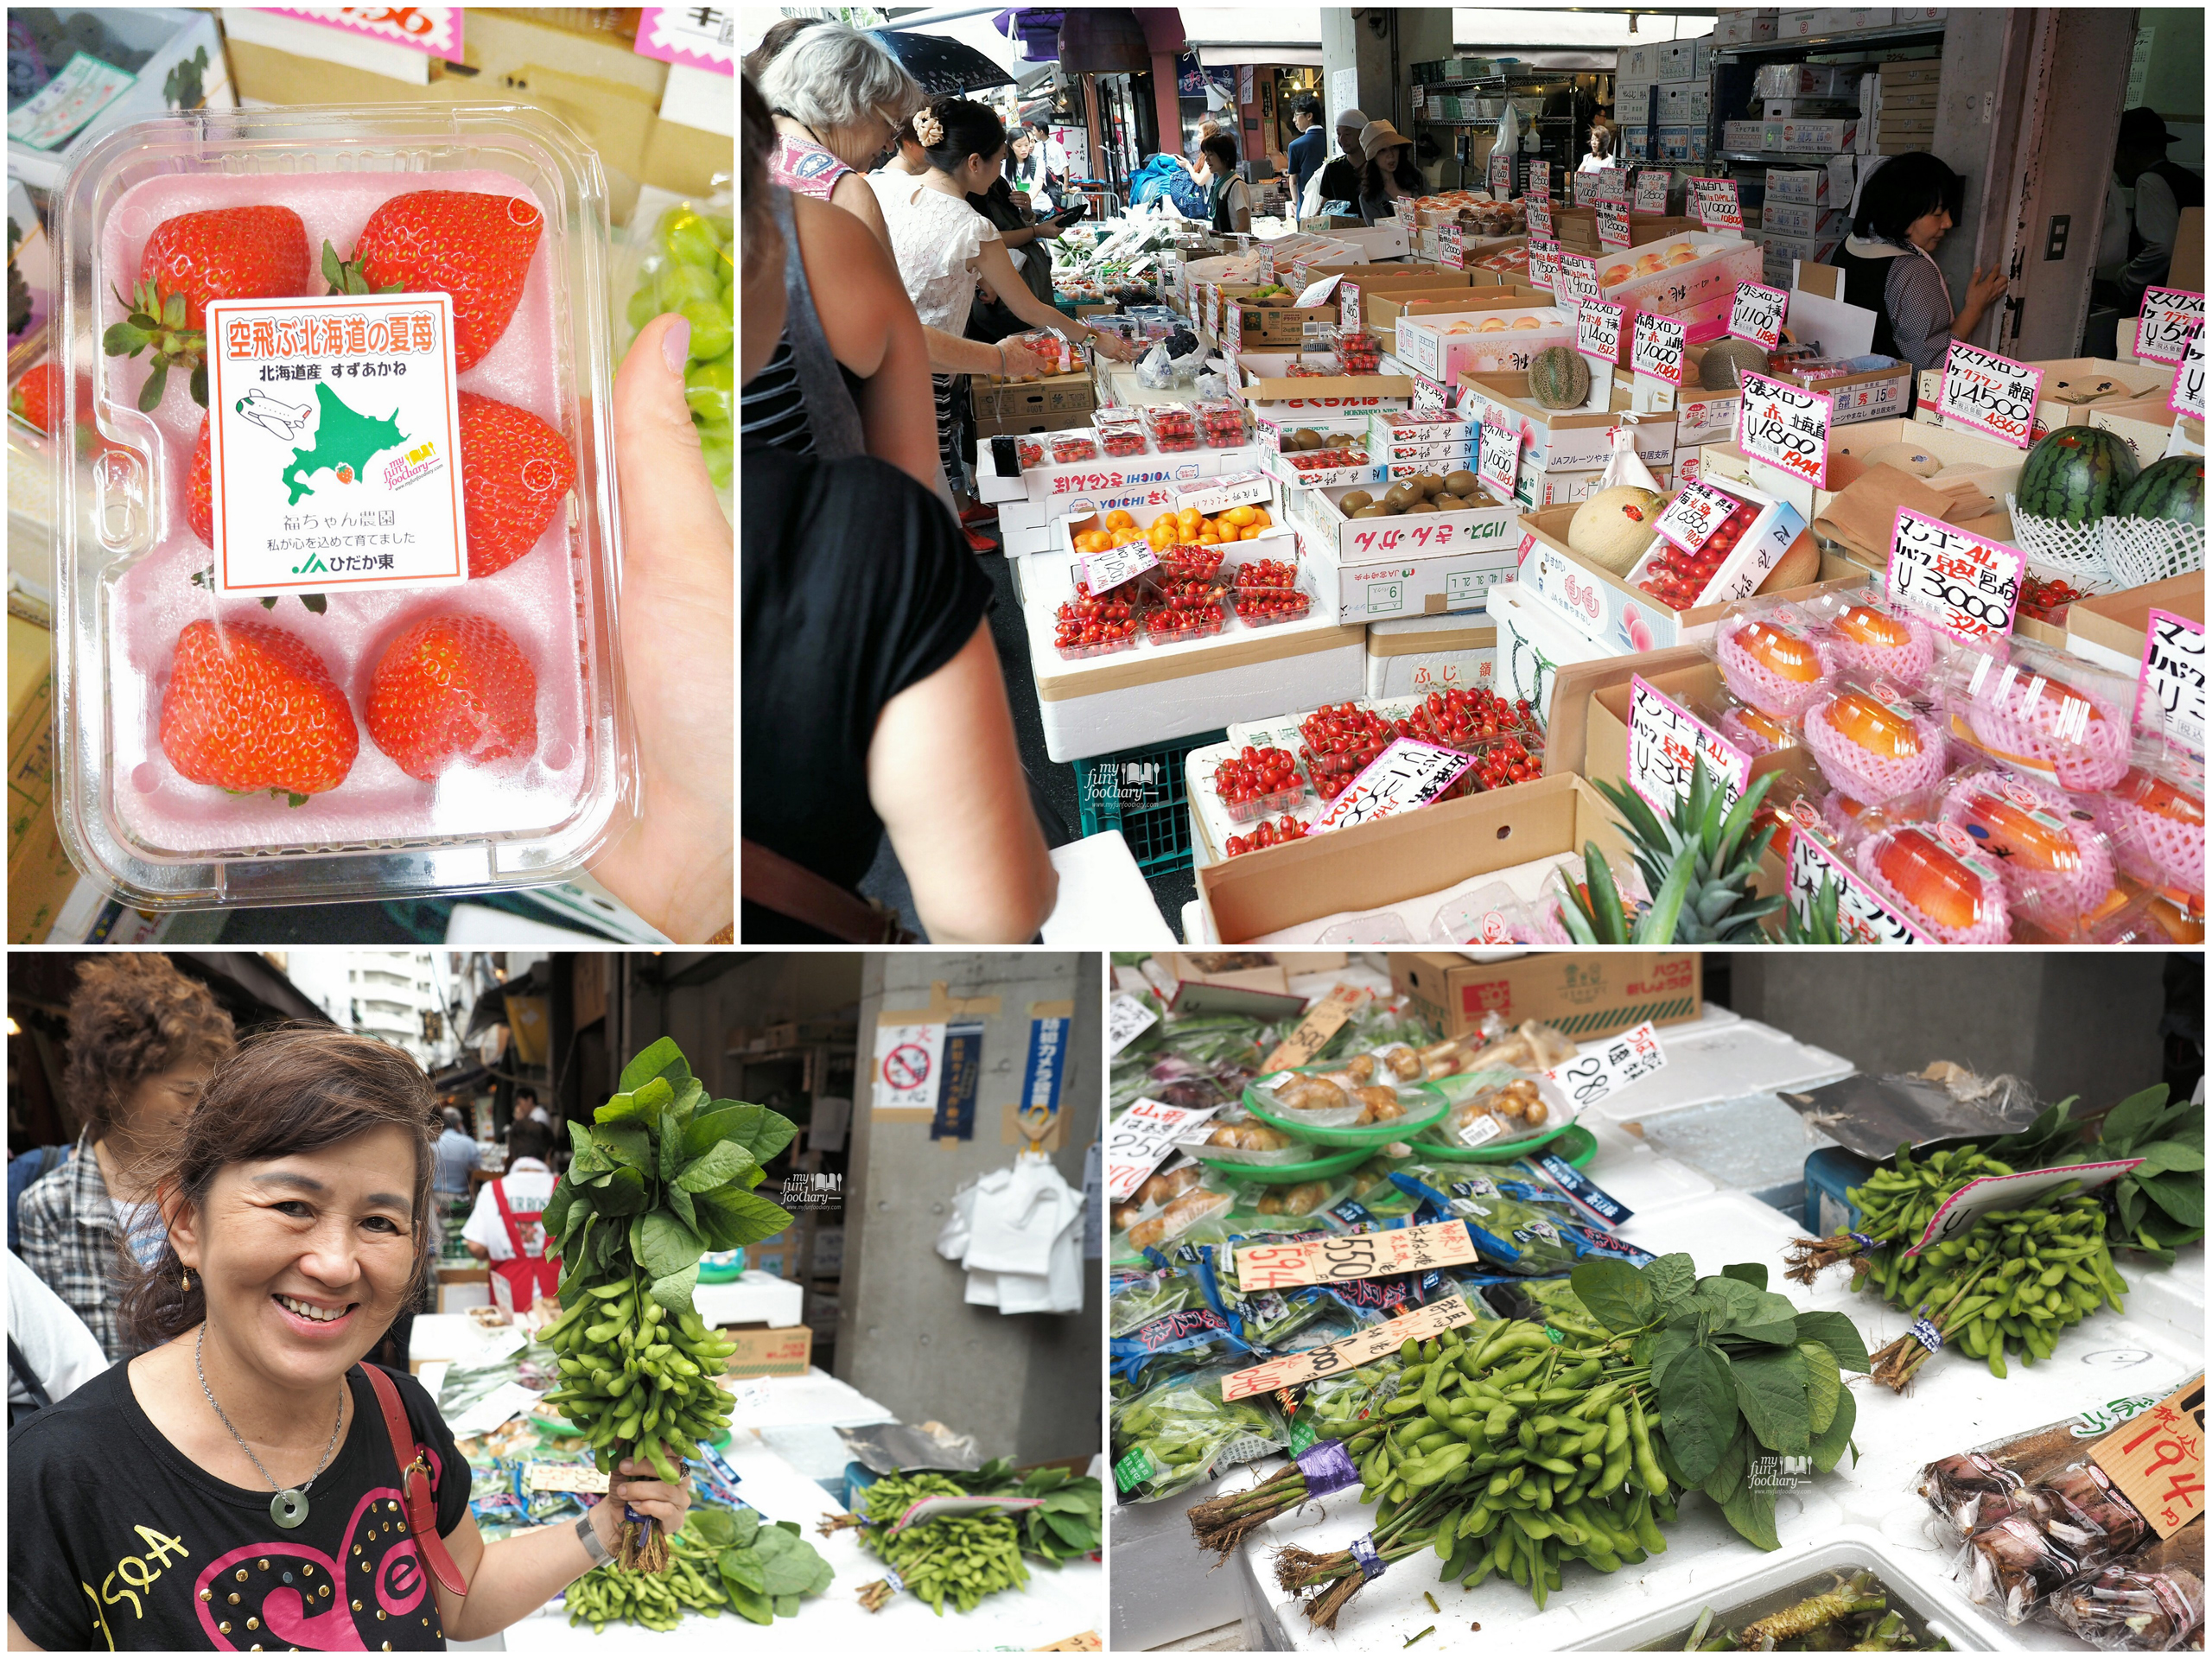 Fresh Fruit and Vegetables at Tsukiji Market by Myfunfoodiary